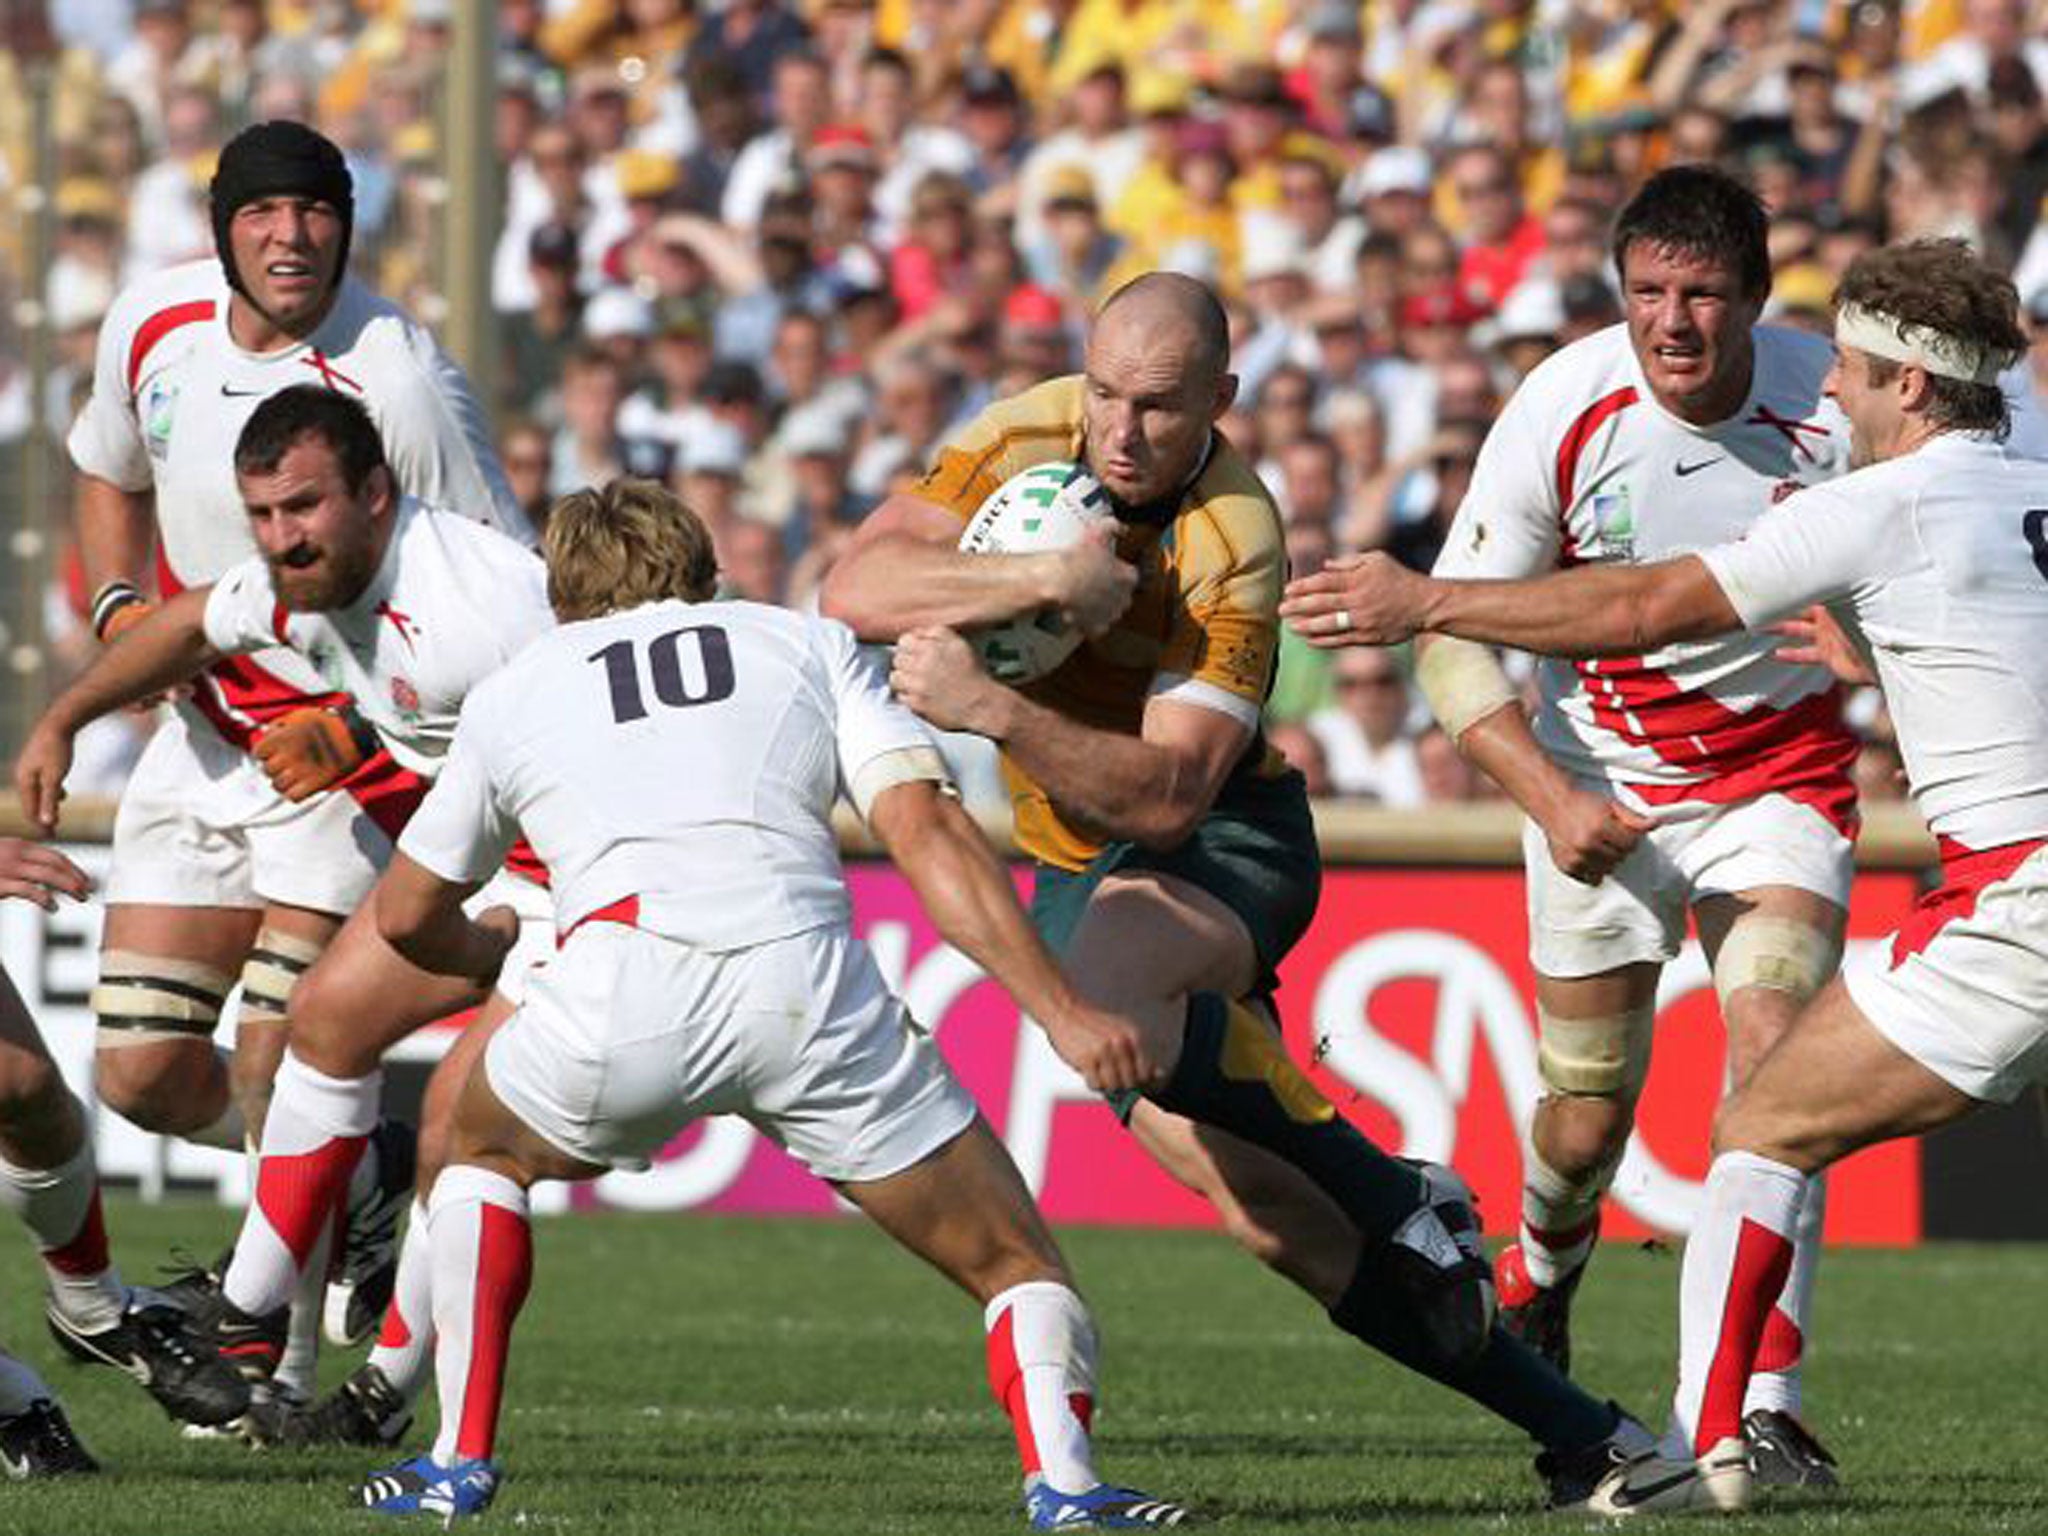 Australia’s Stirling Mortlock takes on the England defence during the 2007 World Cup meeting in Marseilles